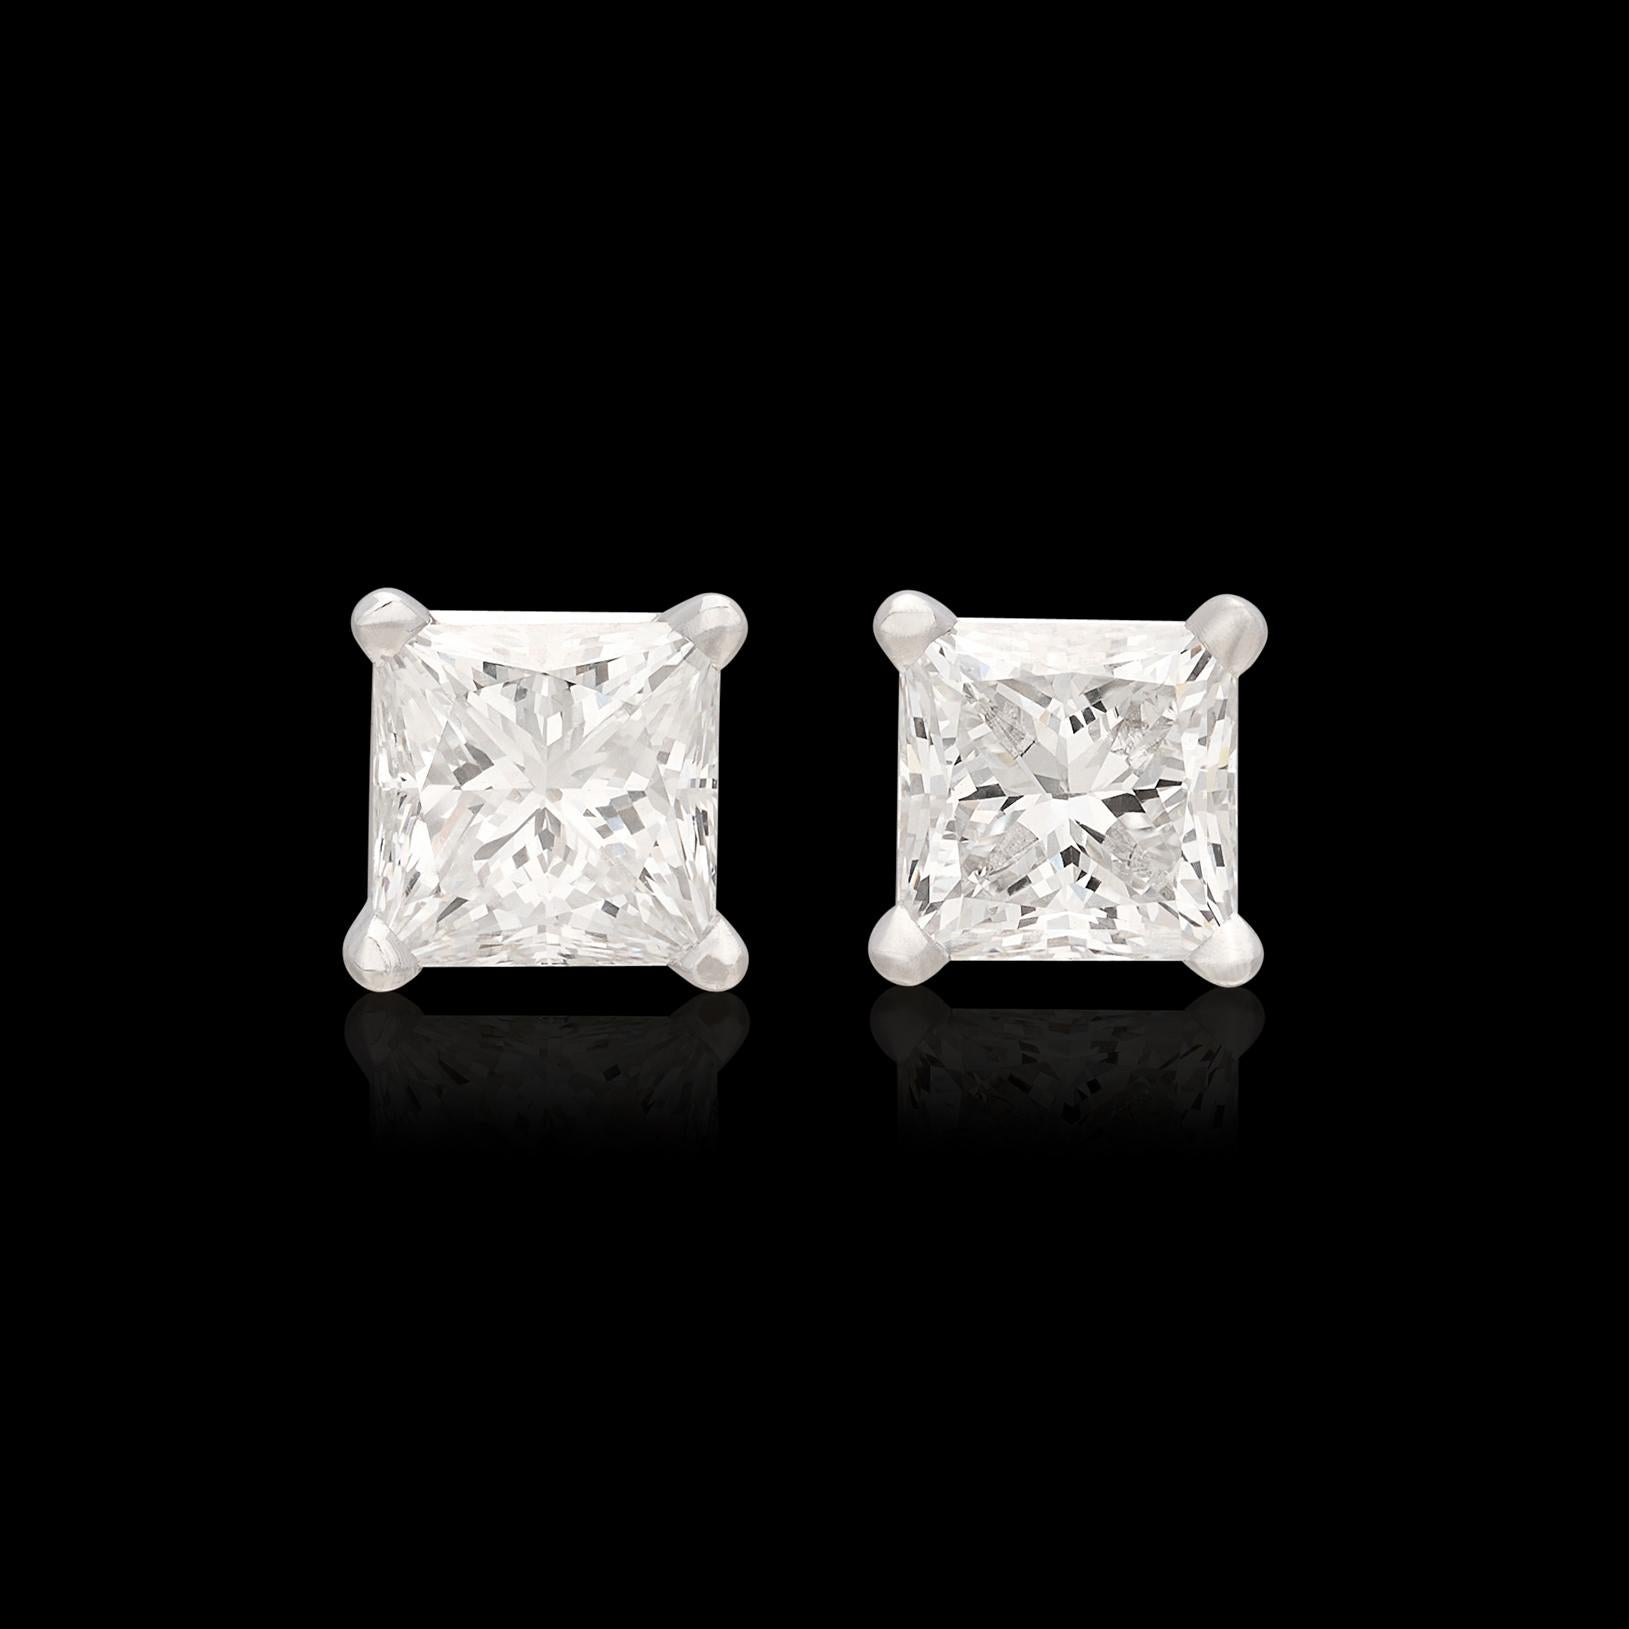 Perhaps the perfect pair of diamond stud earrings. This 18 karat white gold pair features near perfectly matched 1.01 carat and 1.02 carat GIA graded princess cut diamonds (E-G/VS2). Both diamonds deliver exceptional sparkle and fire, and are